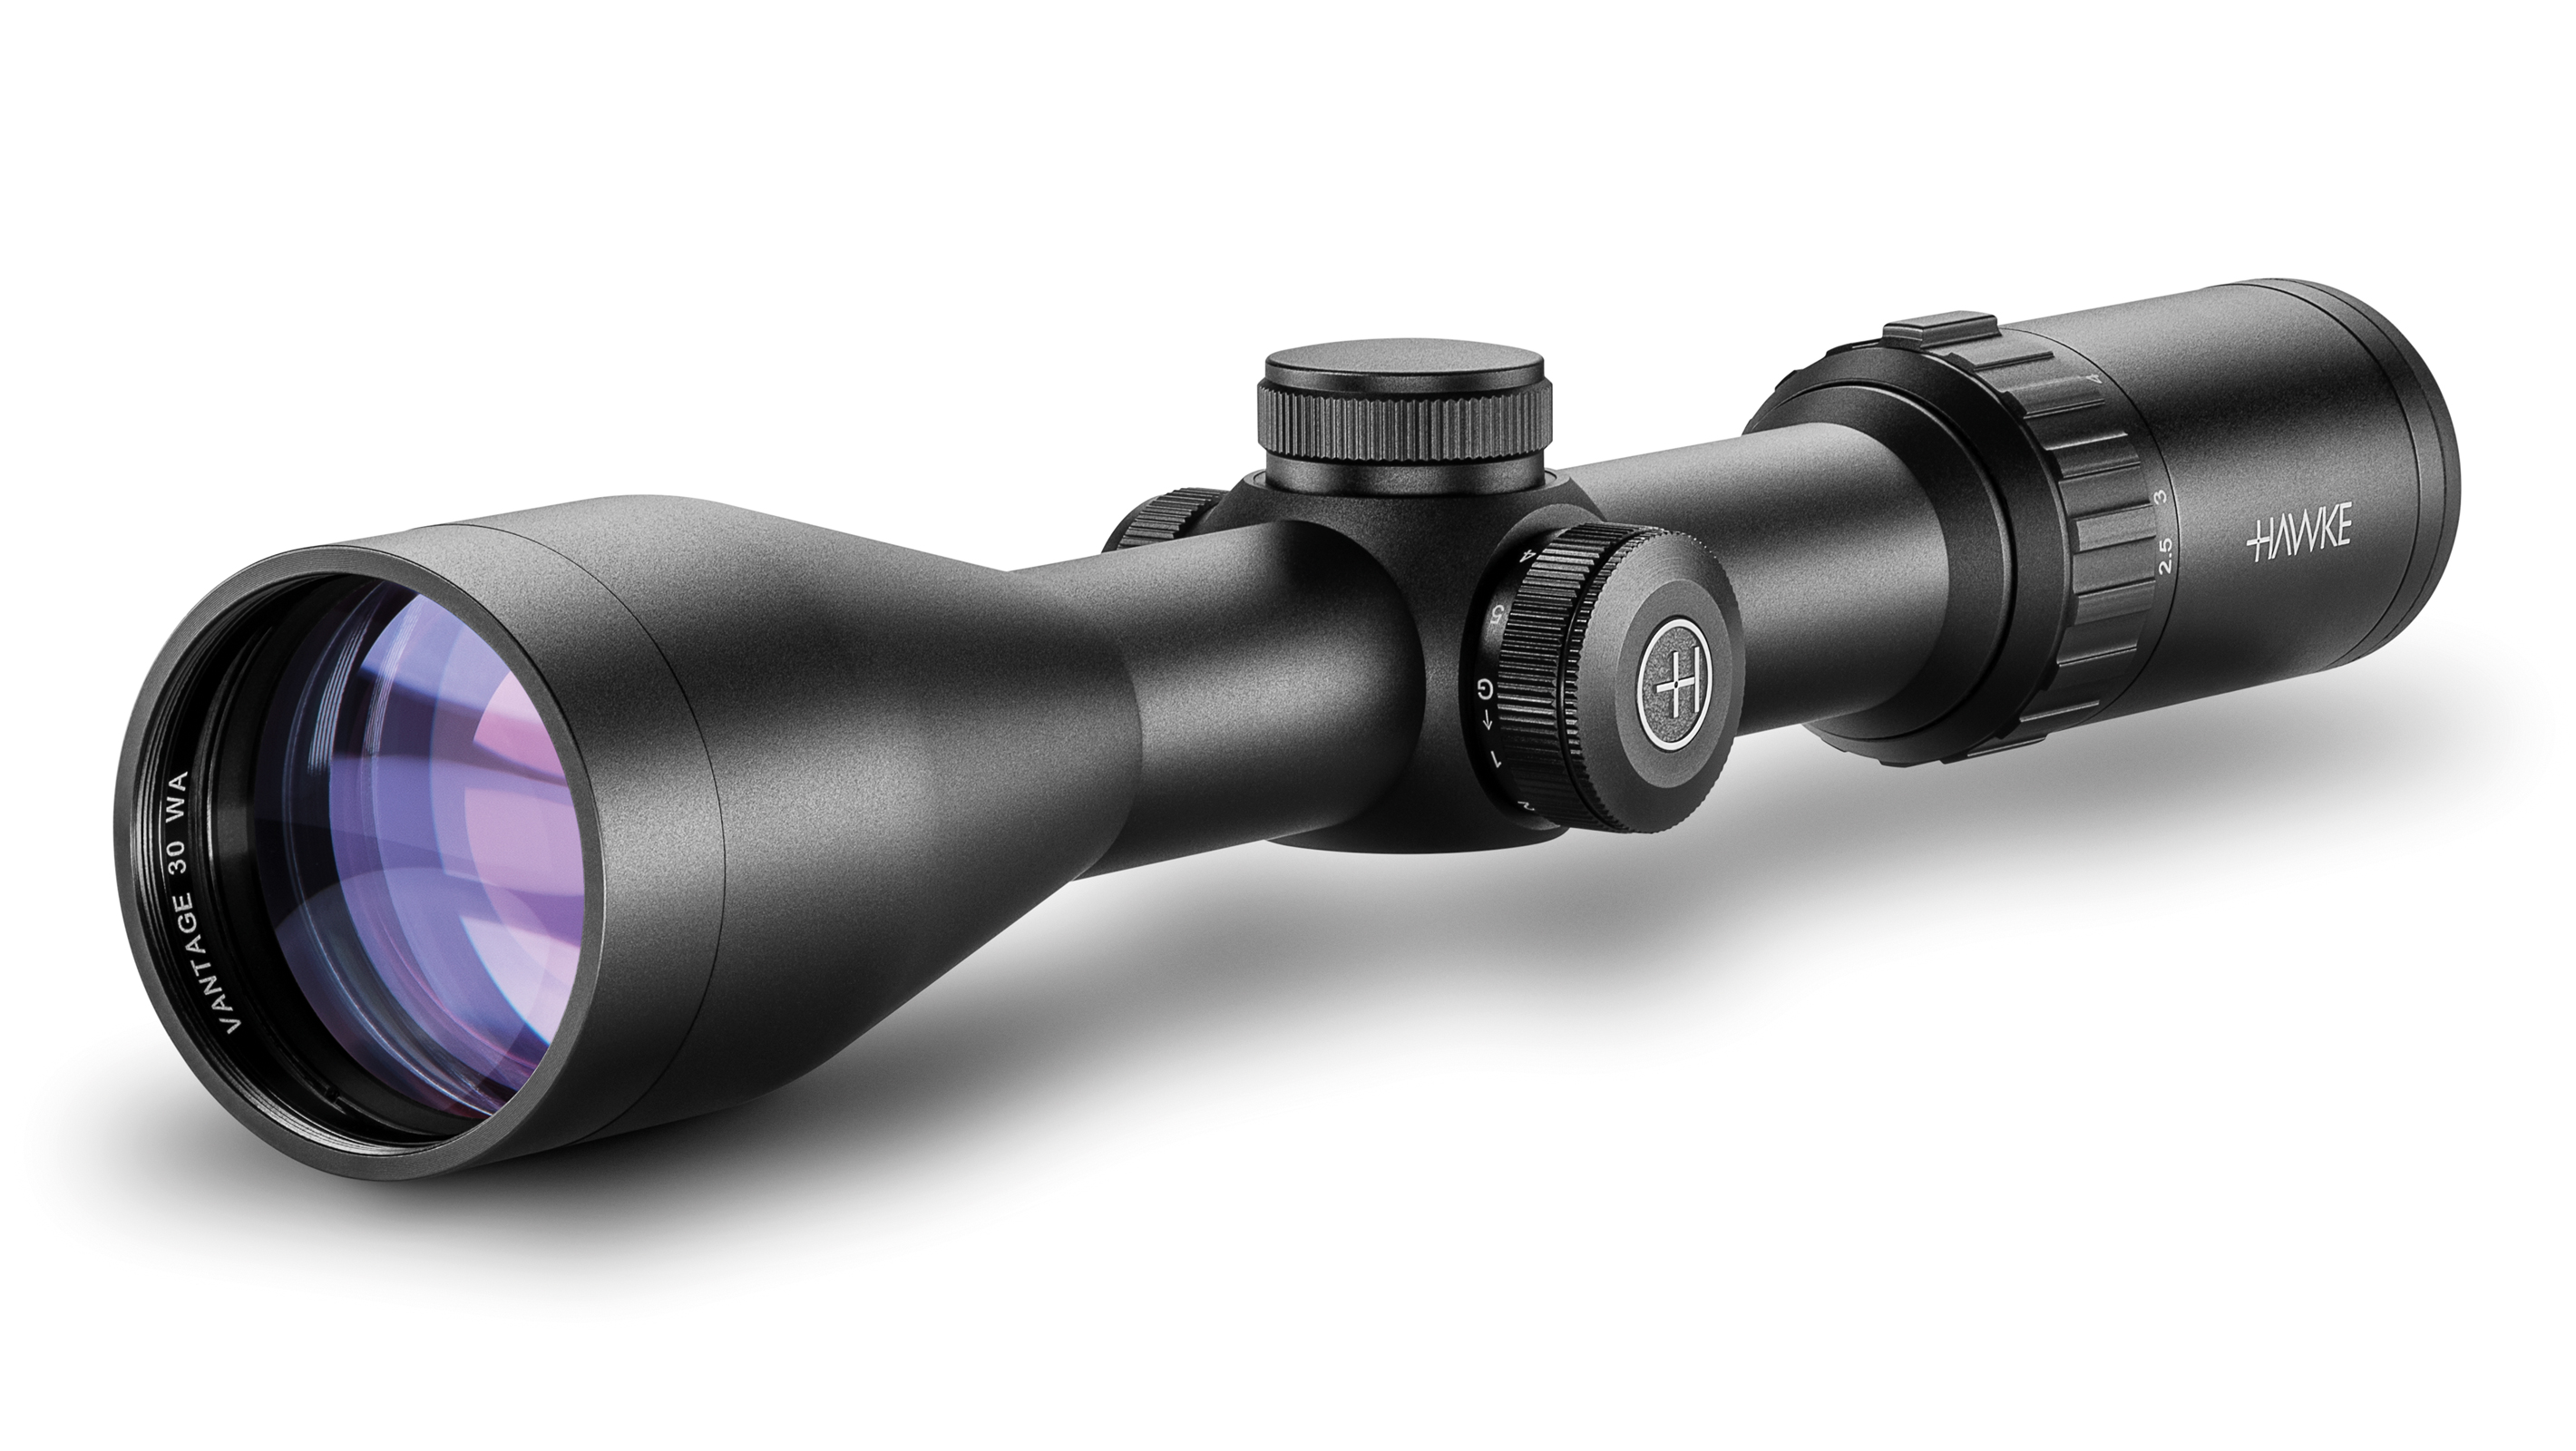 Objective End View Of The Hawke Vantage 30 WA 2.5-10x50 L4A Dot Rifle Scope